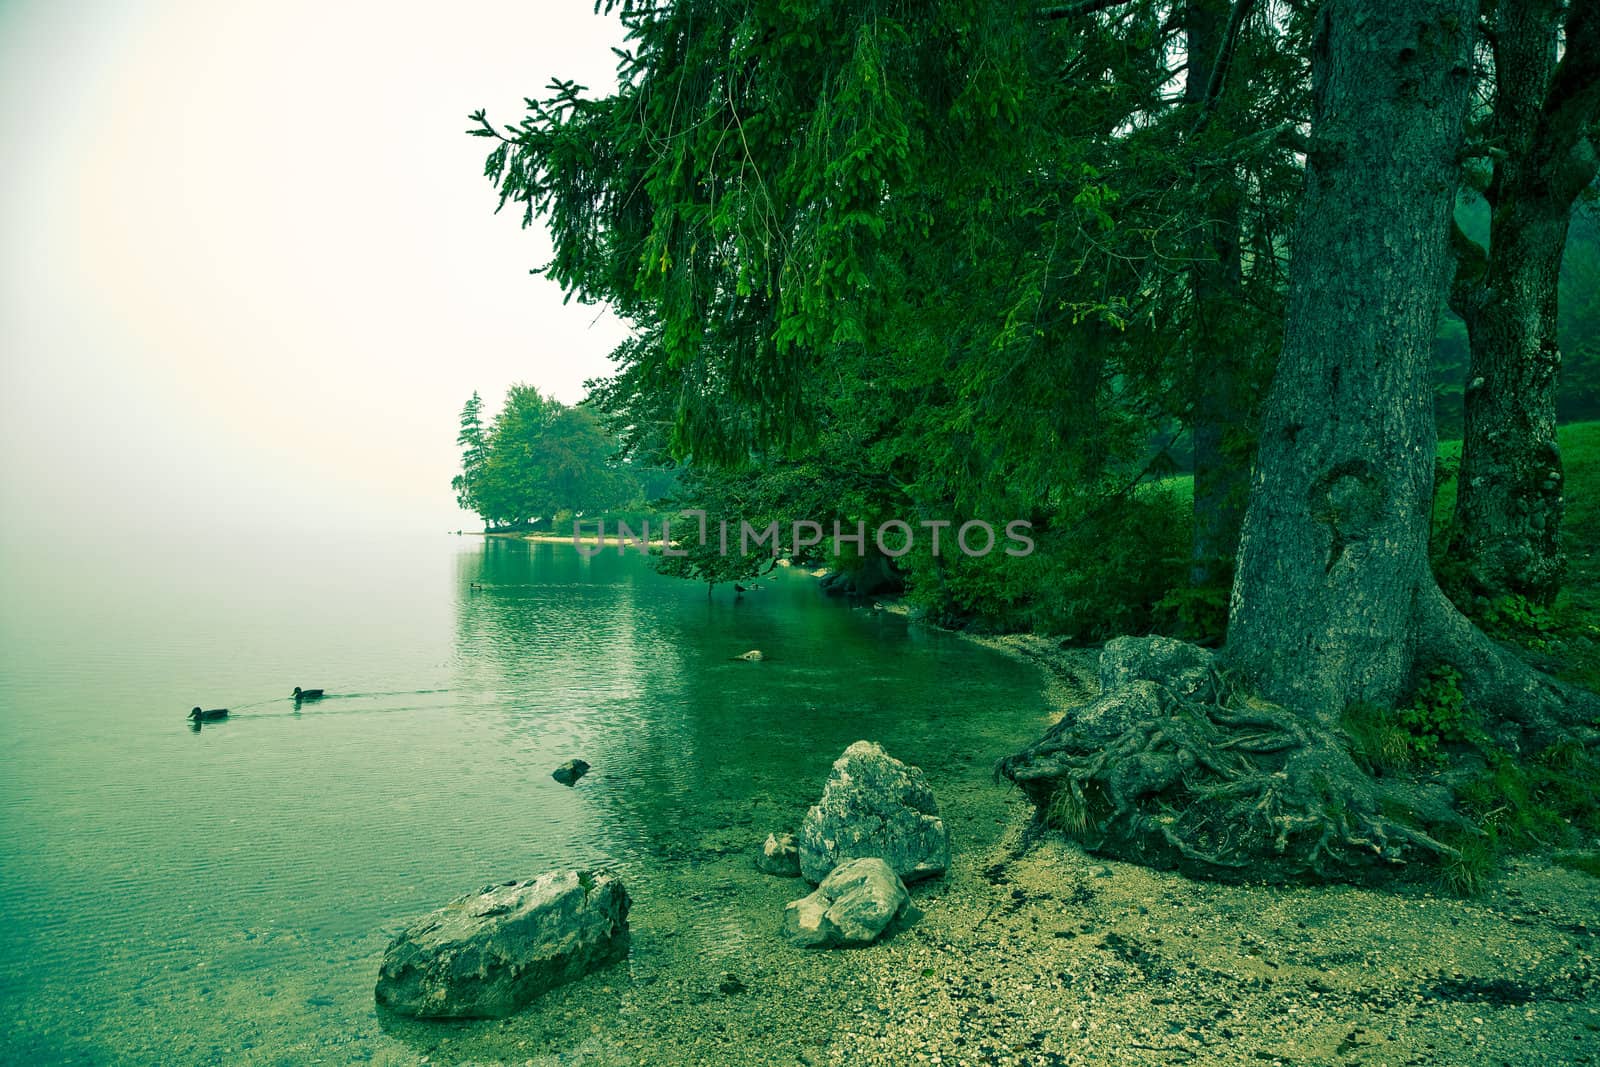 Tranquil and misty morning by Lake Bohinj - Slovenia. Cross processed. Space for text.